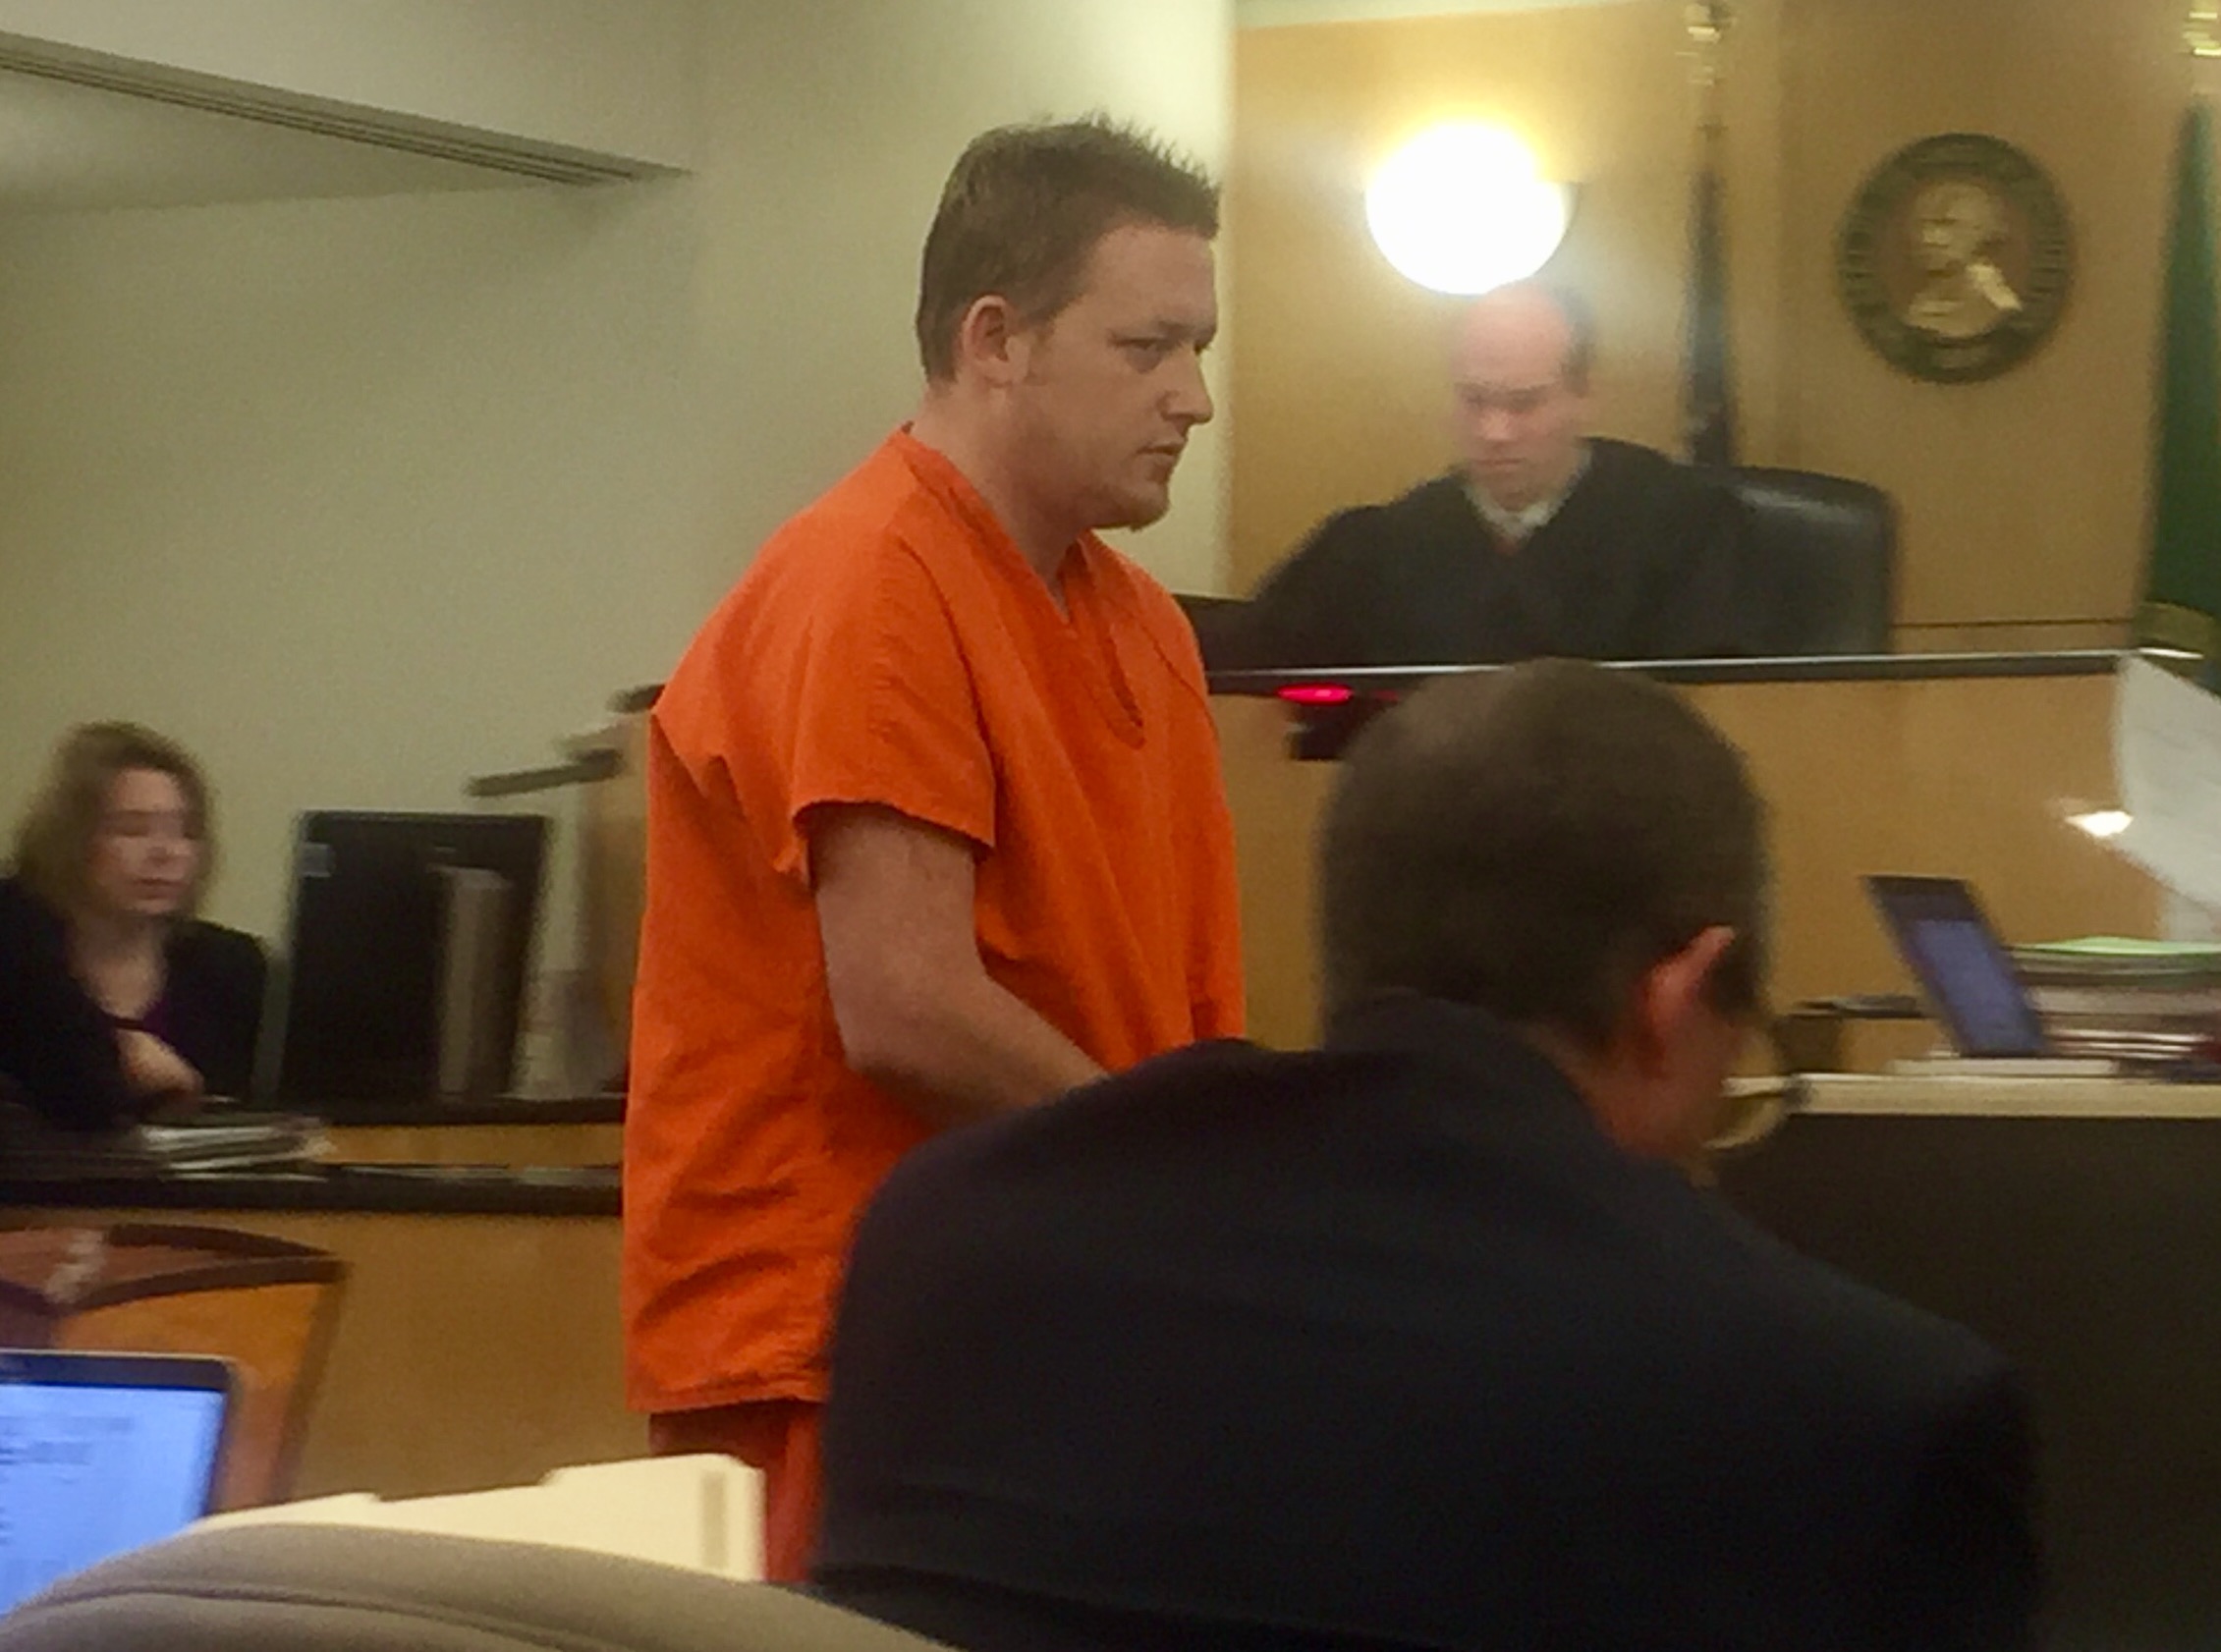 Kyle Holder enters a not-guilty plea by reason of insanity to attempted first-degree domestic violence murder Tuesday in Clark County Superior Court. Holder is accused of beating his 2-year-old daughter nearly to death at a Salmon Creek motel in June.